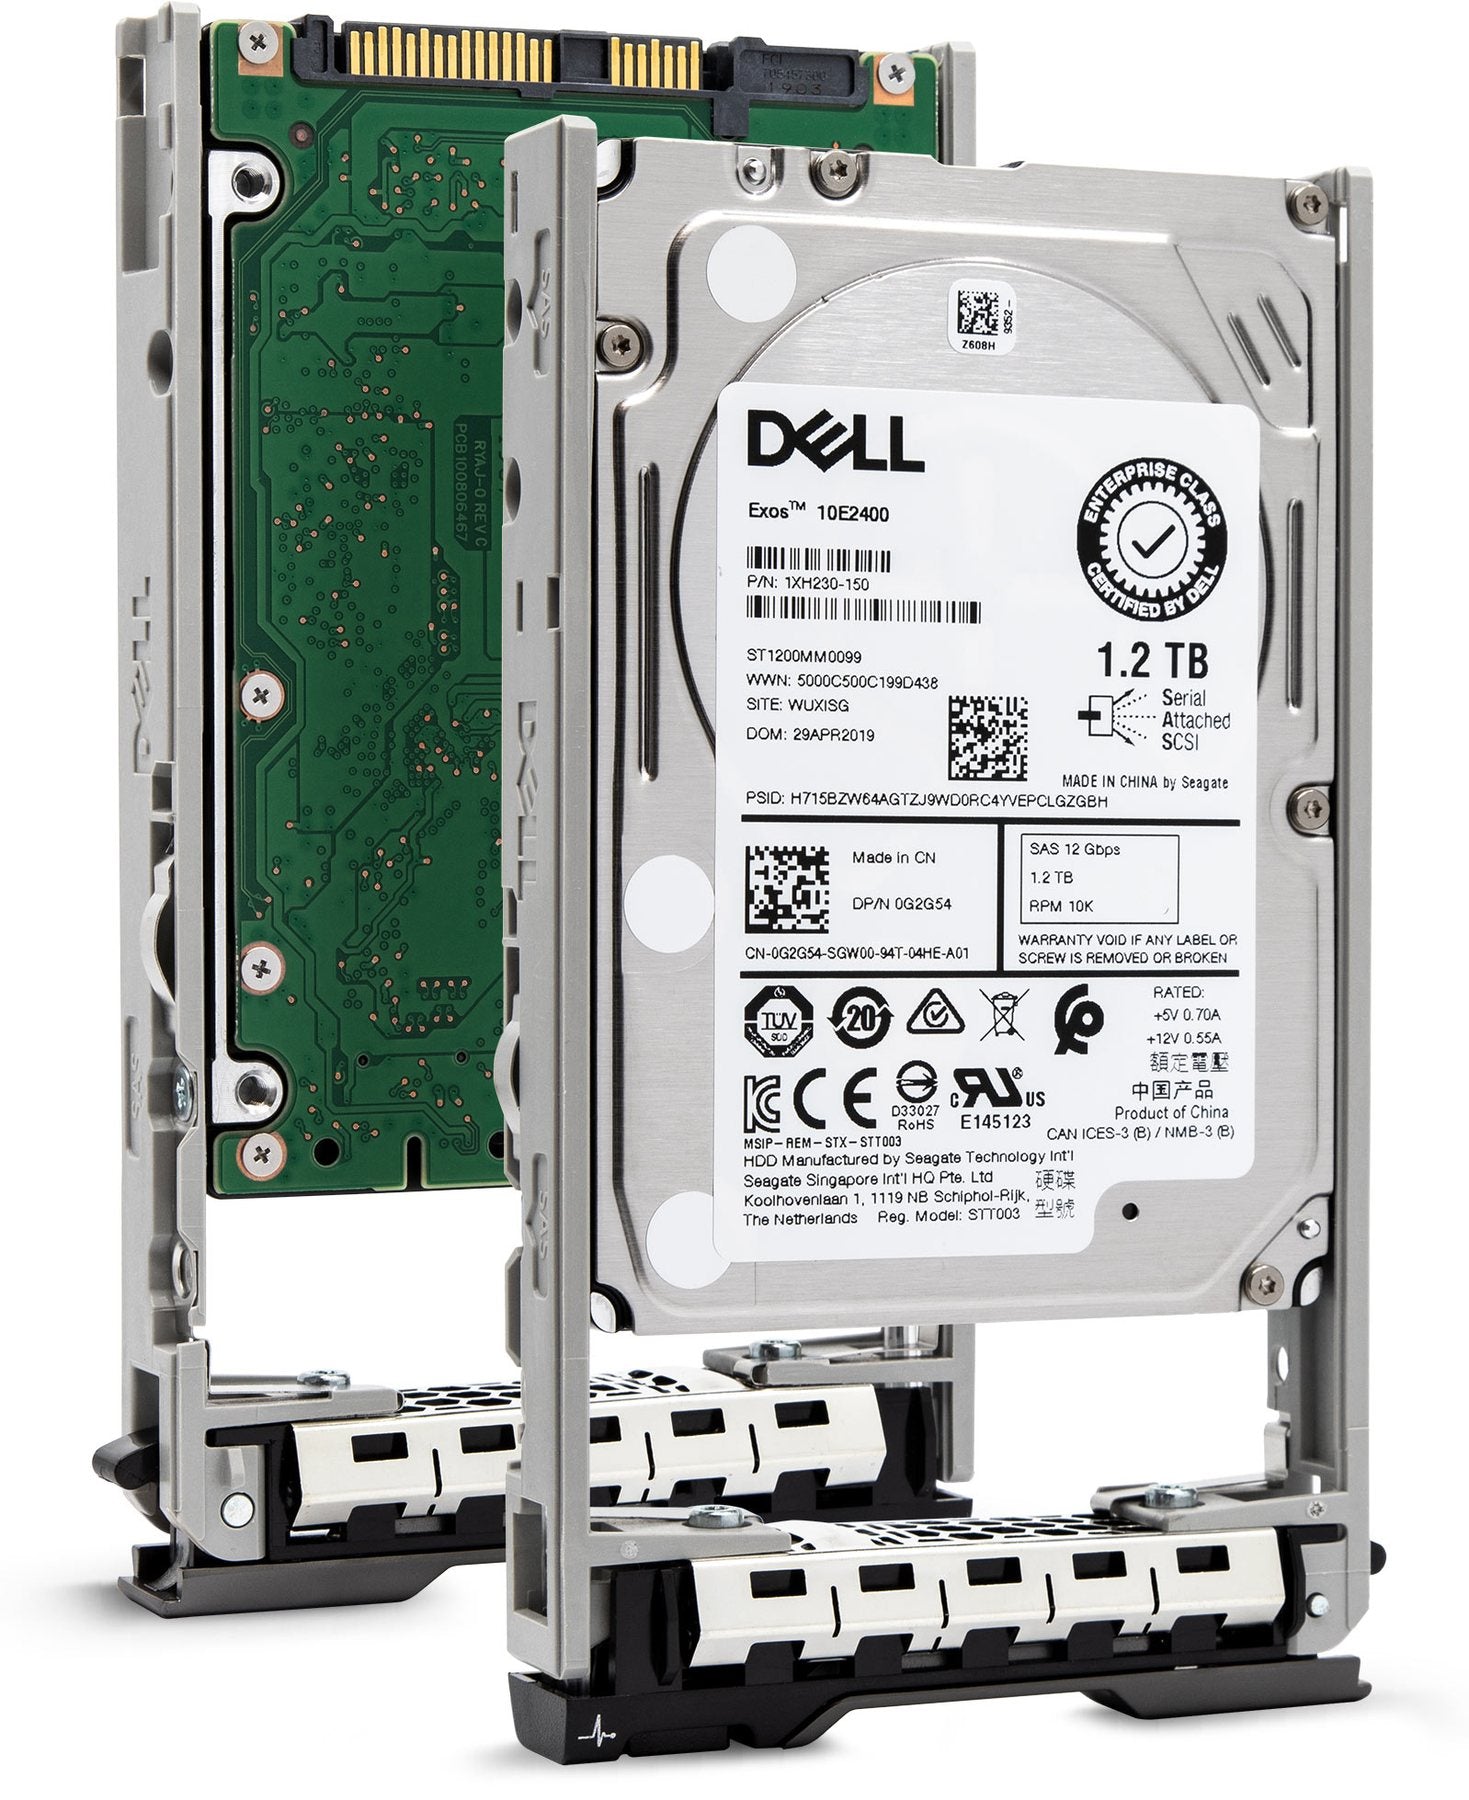 Dell G13 400-ALVW 1.2TB 10K RPM SAS 12Gb/s 512n 2.5" Manufacturer Recertified HDD